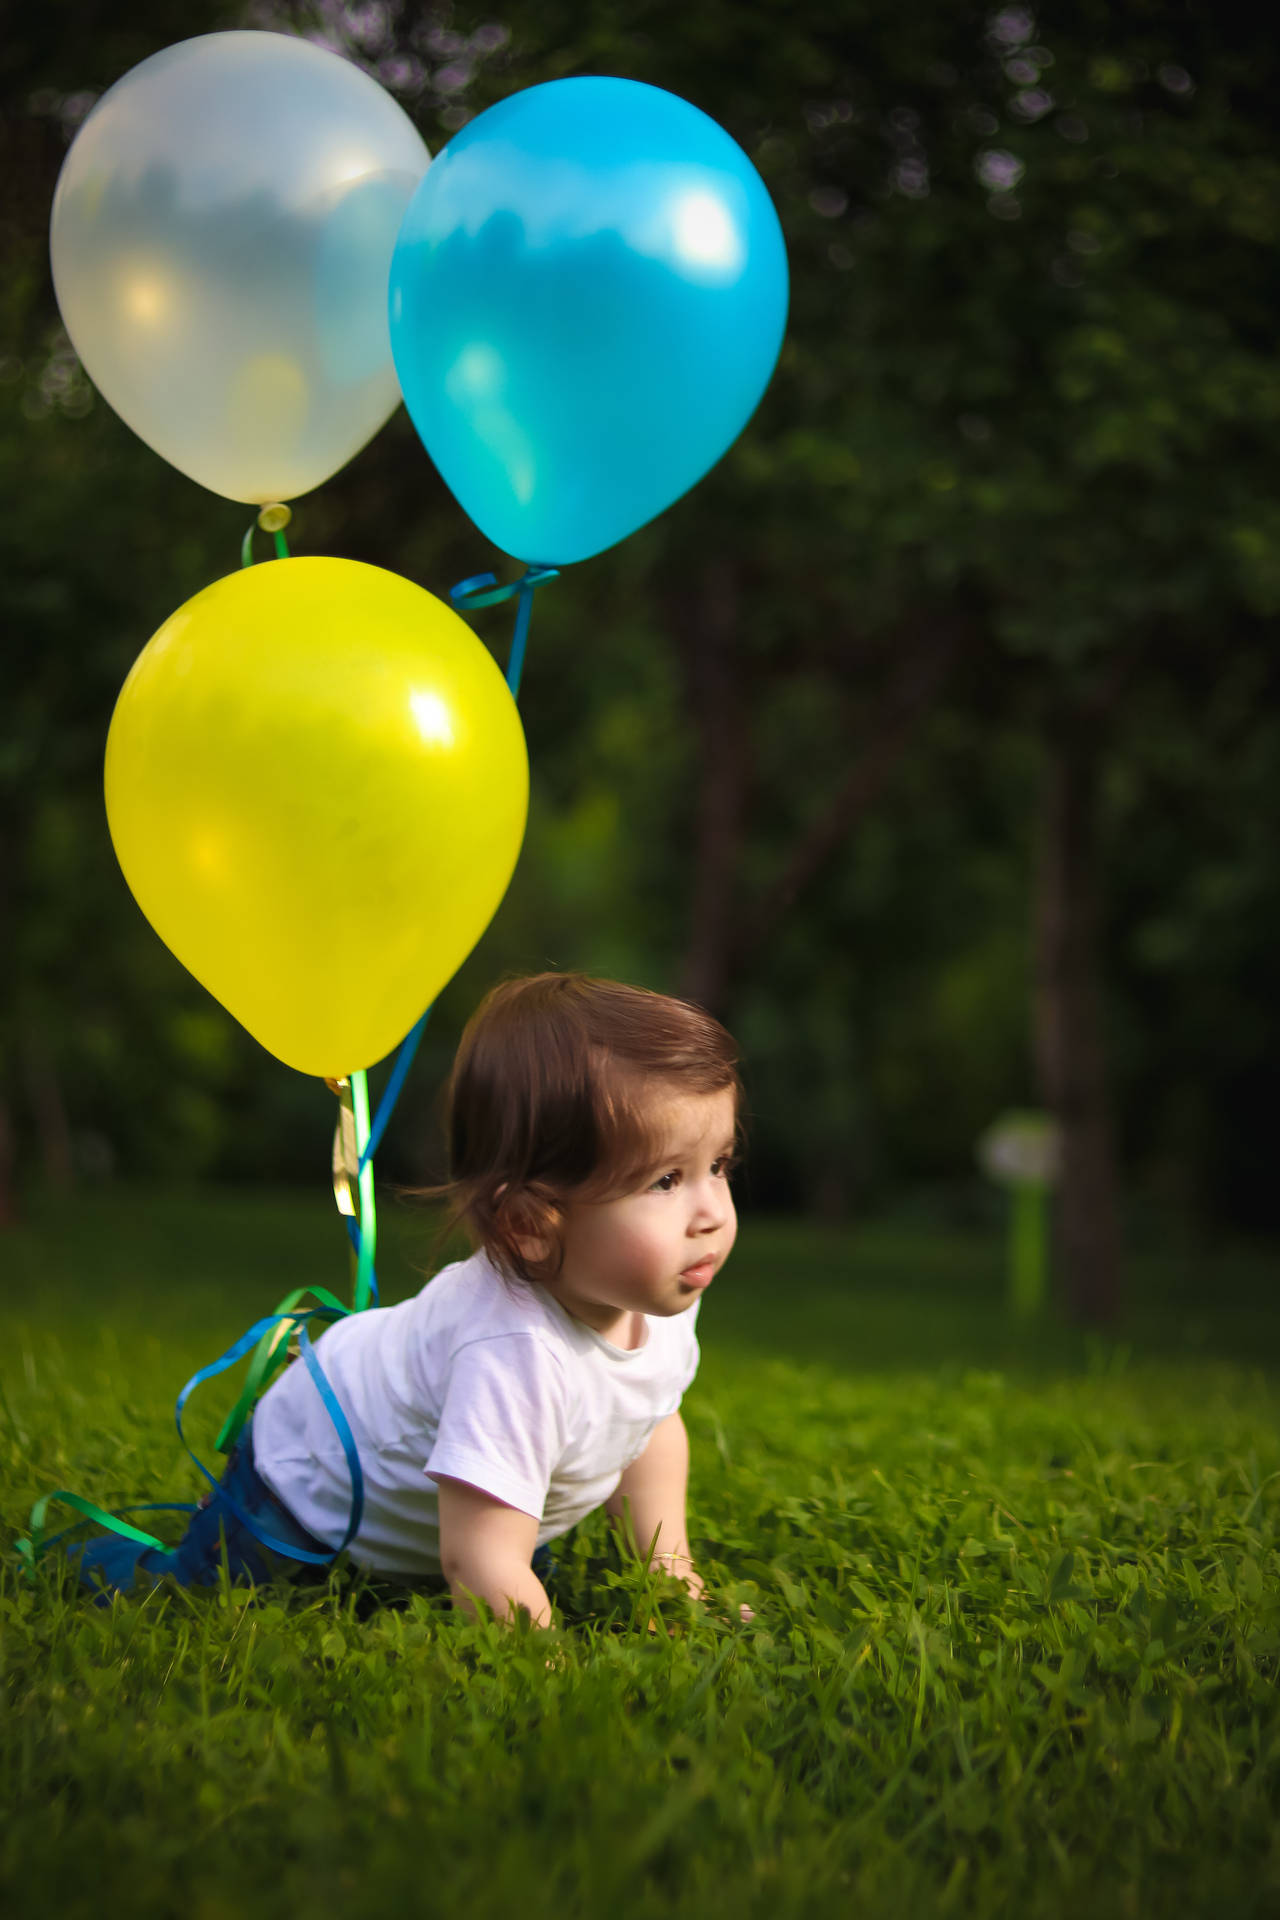 Cute Baby Crawling On Grass With Balloons Background